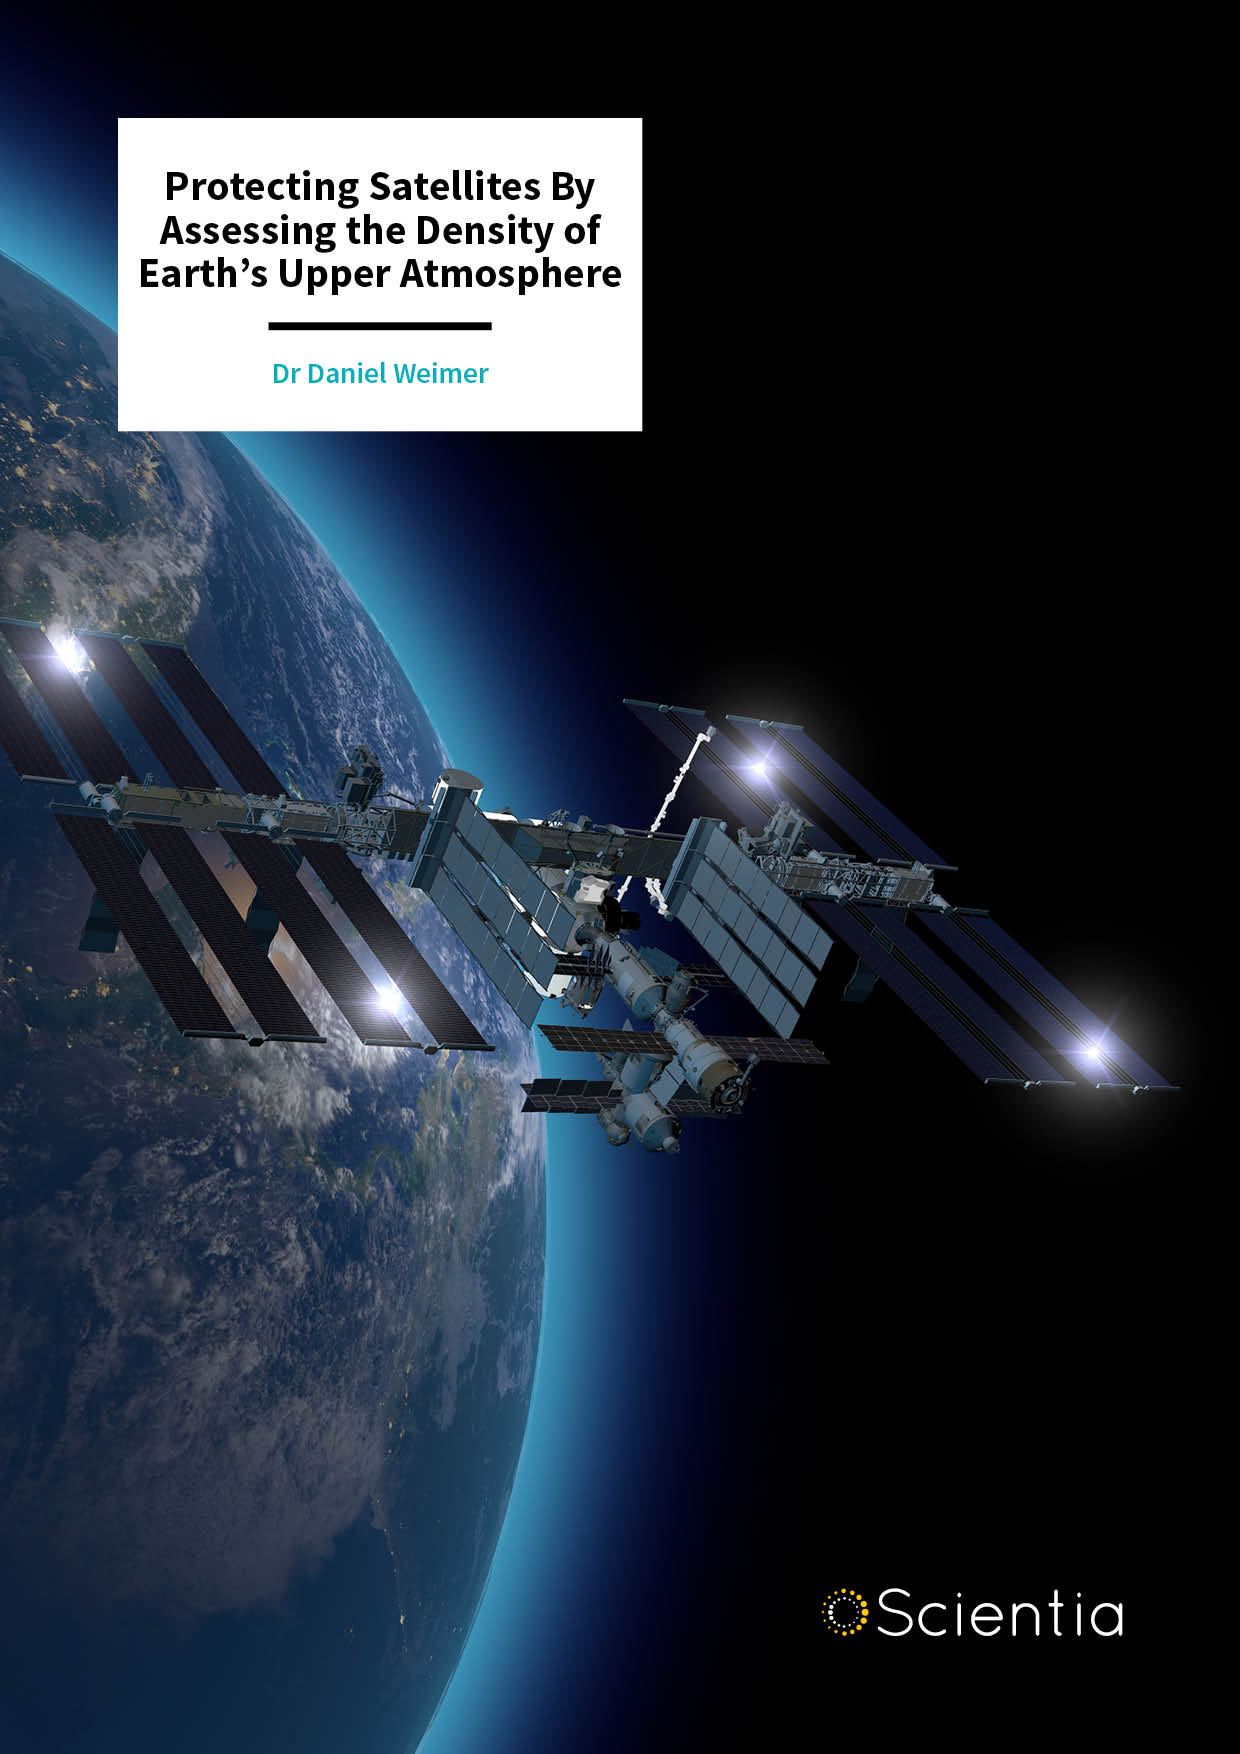 Dr Daniel Weimer | Protecting Satellites By Assessing the Density of Earth’s Upper Atmosphere